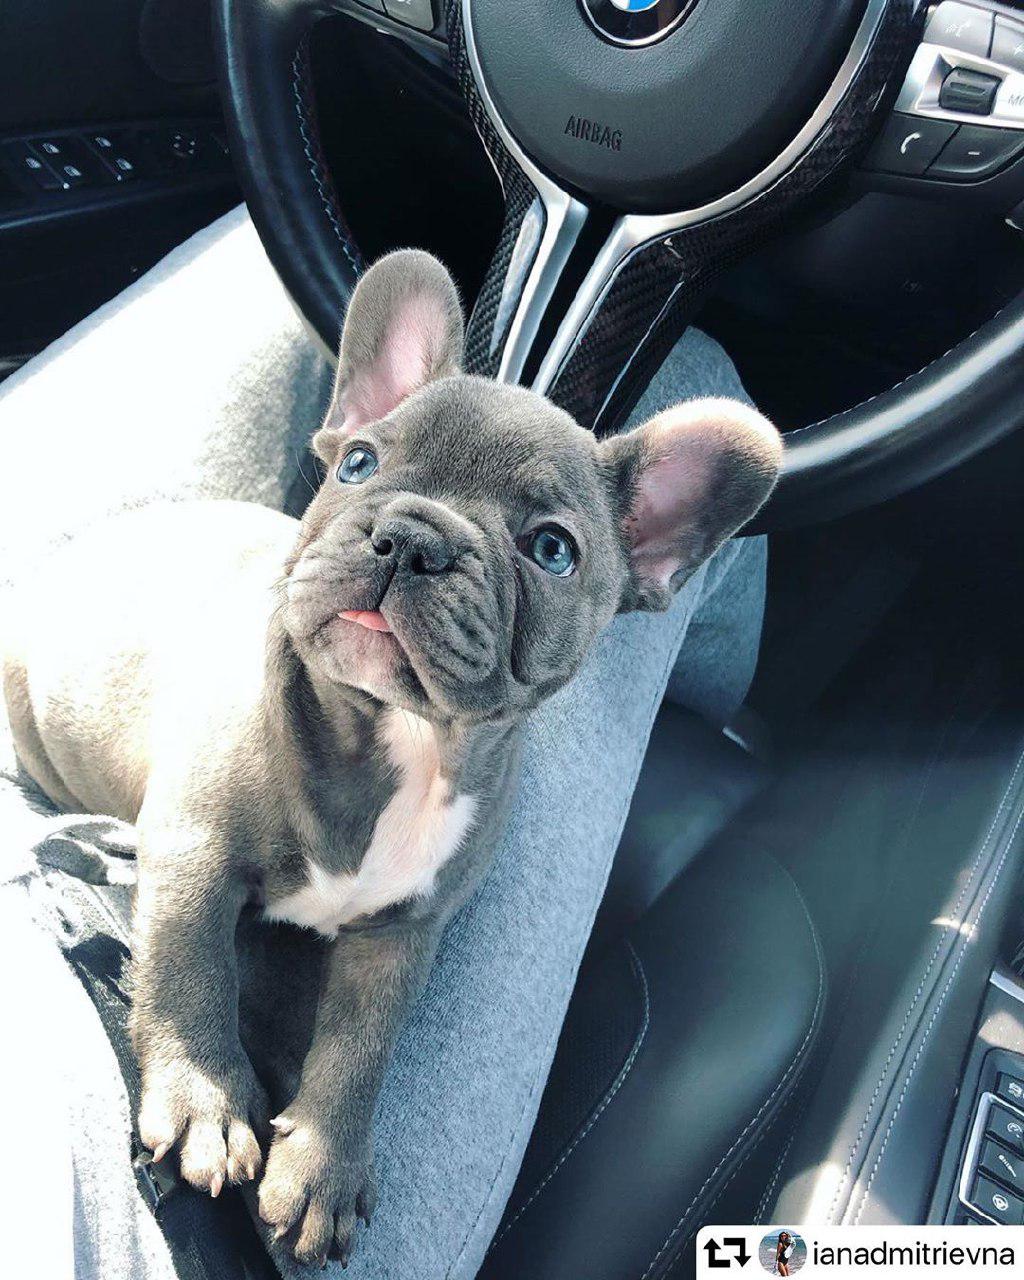 A French Bulldog puppy lying on the lap of a woman in the driver's seat